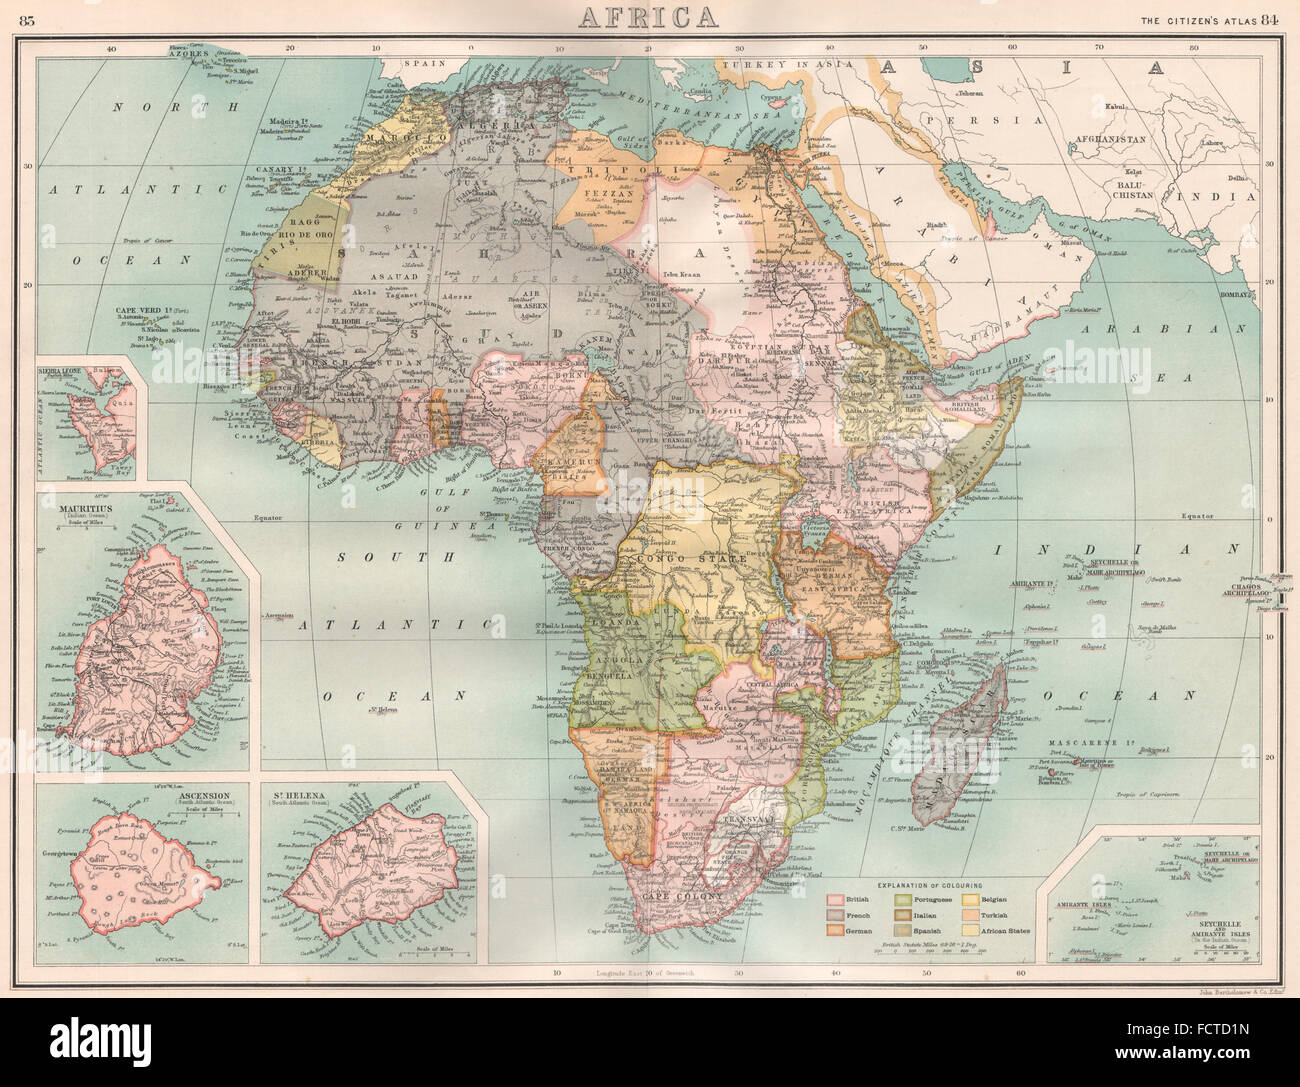 THE TIMES 1900 map Nigeria Sahara British French Colonial Africa North-West 